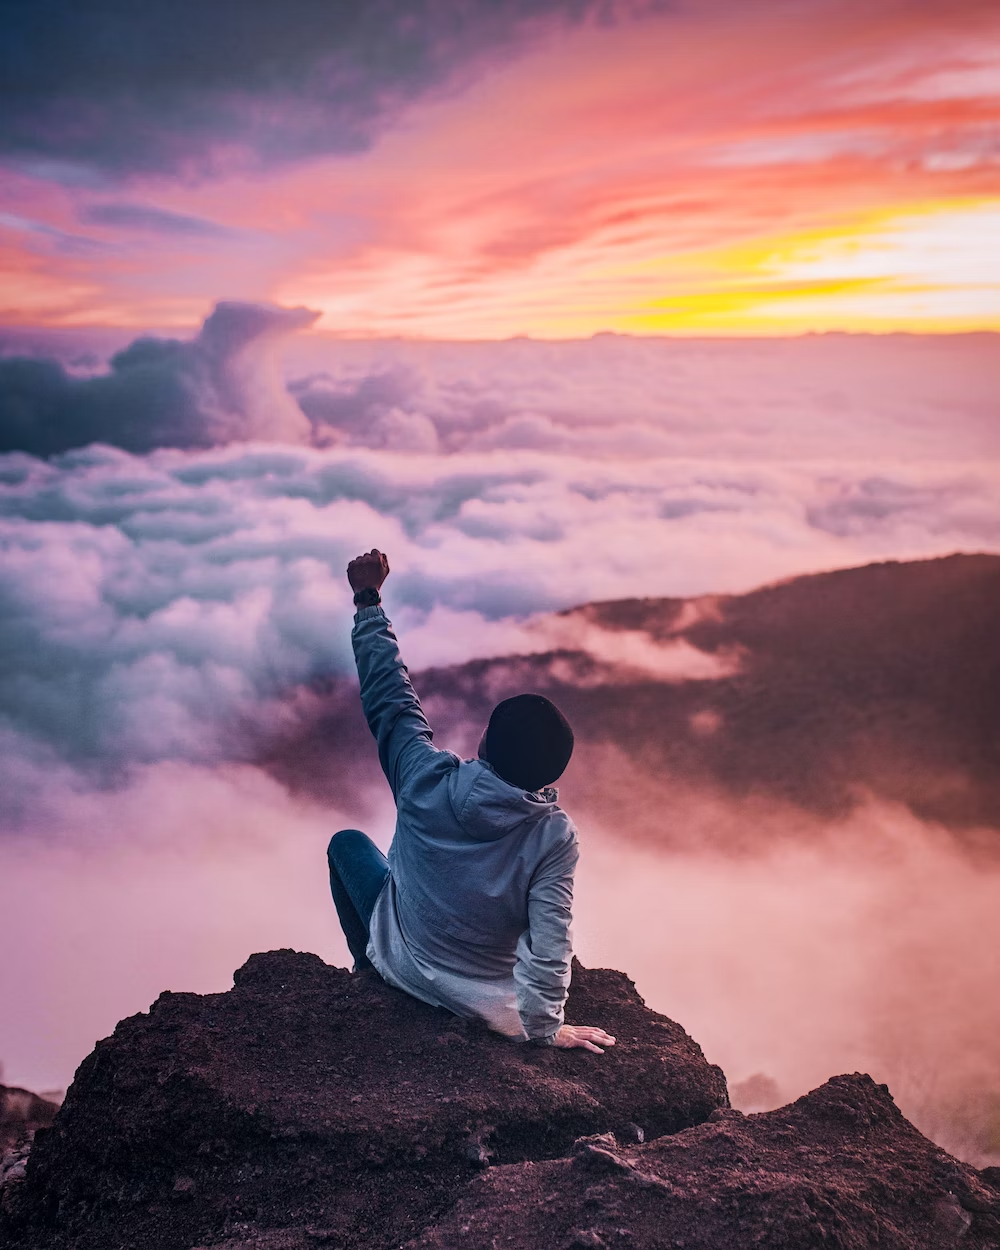 A Boy Sitting on a Mountain in Colorful Clouds With His Fist In The Air